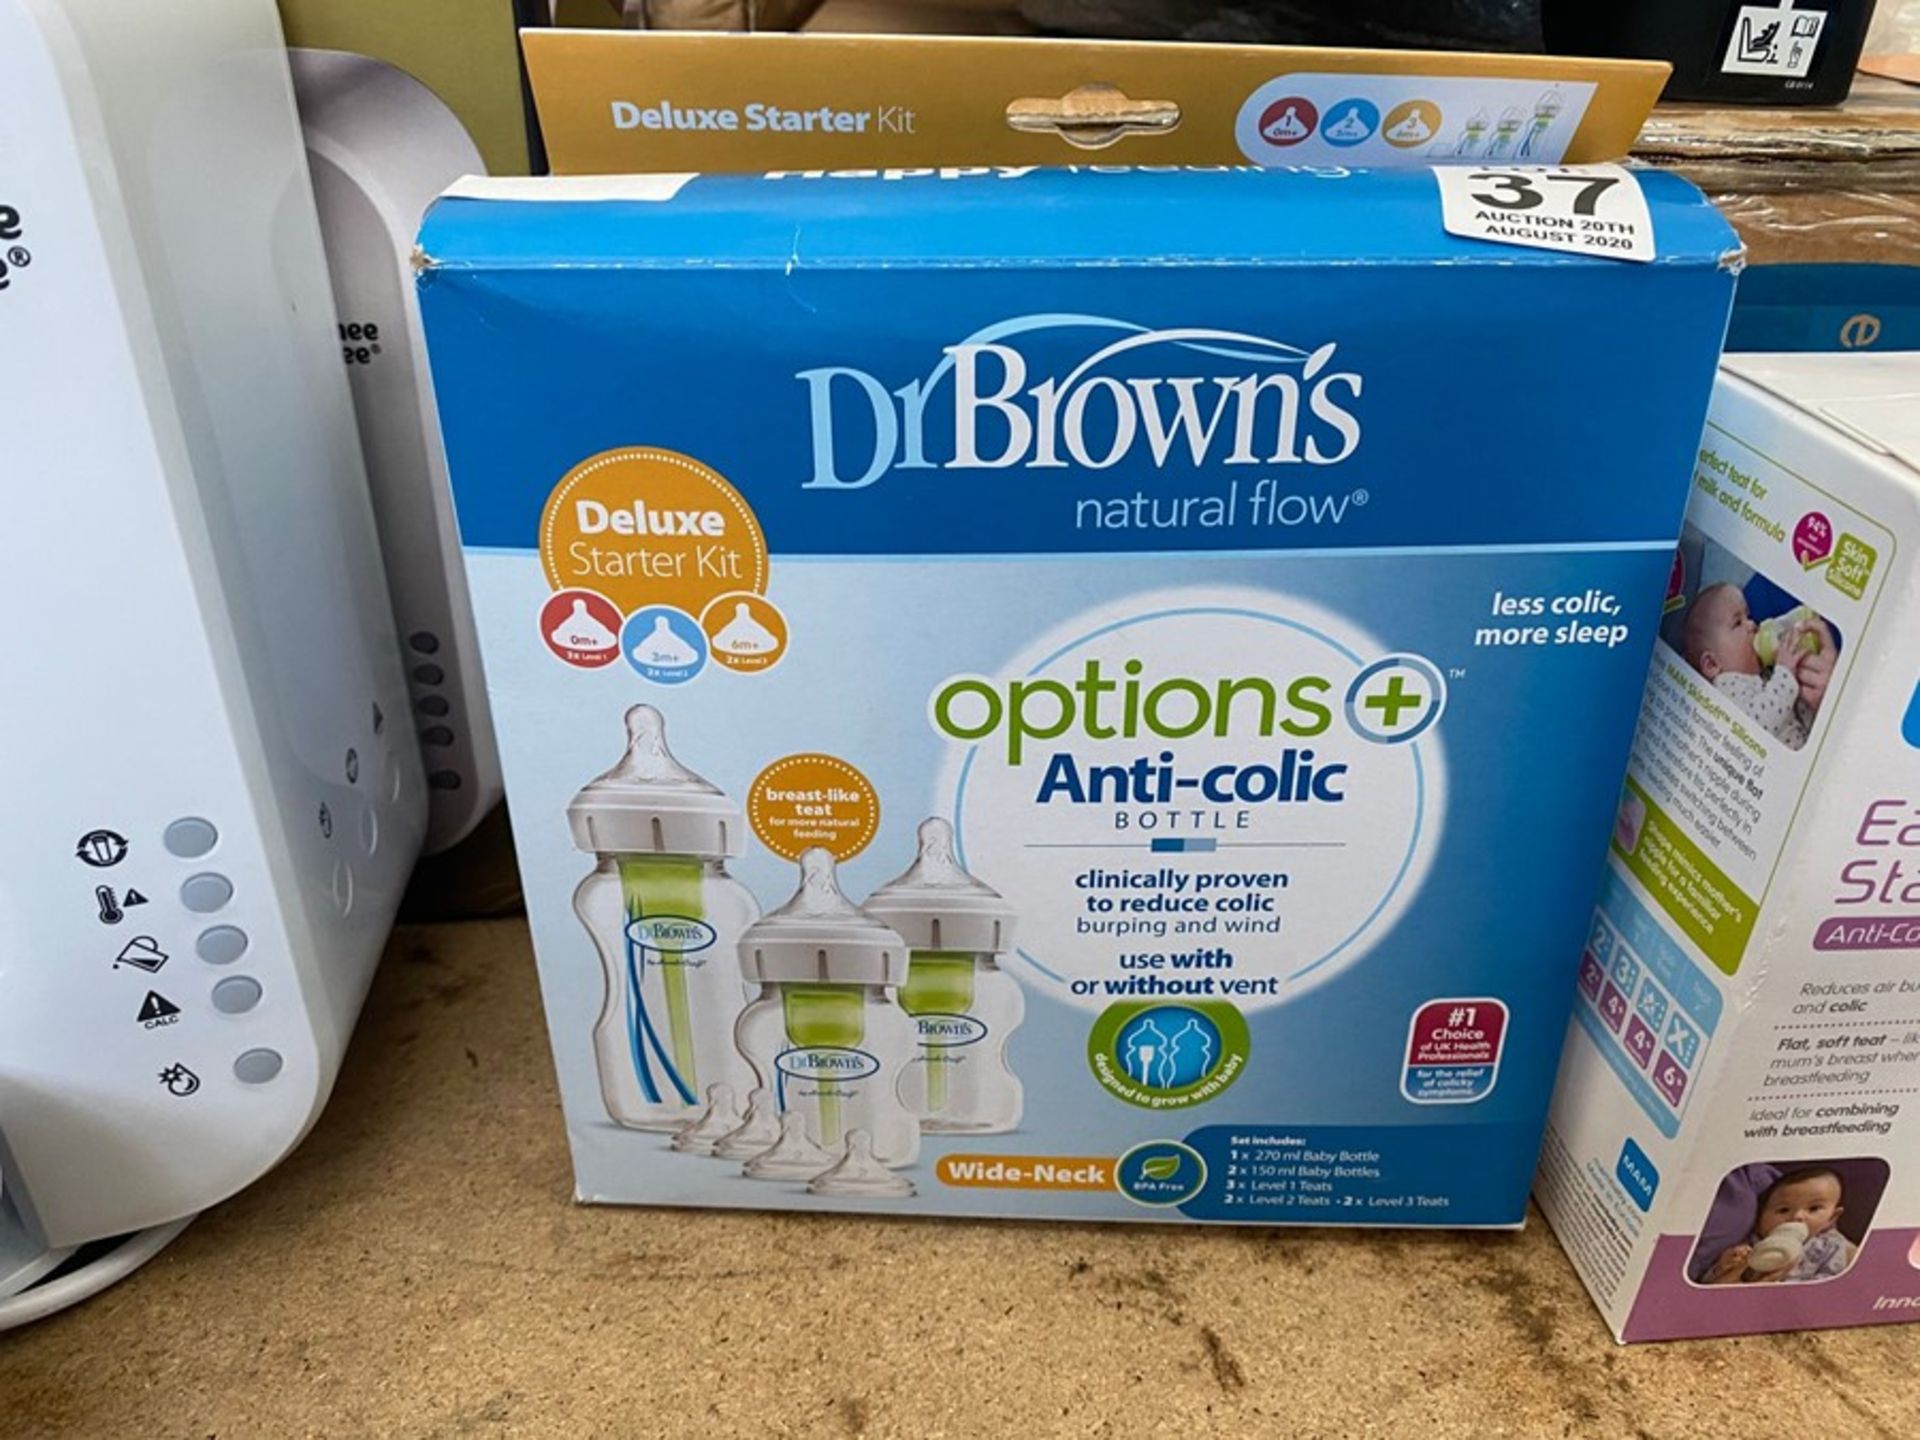 DR BROWN'S ANTI-COLIC BOTTLE BOXED